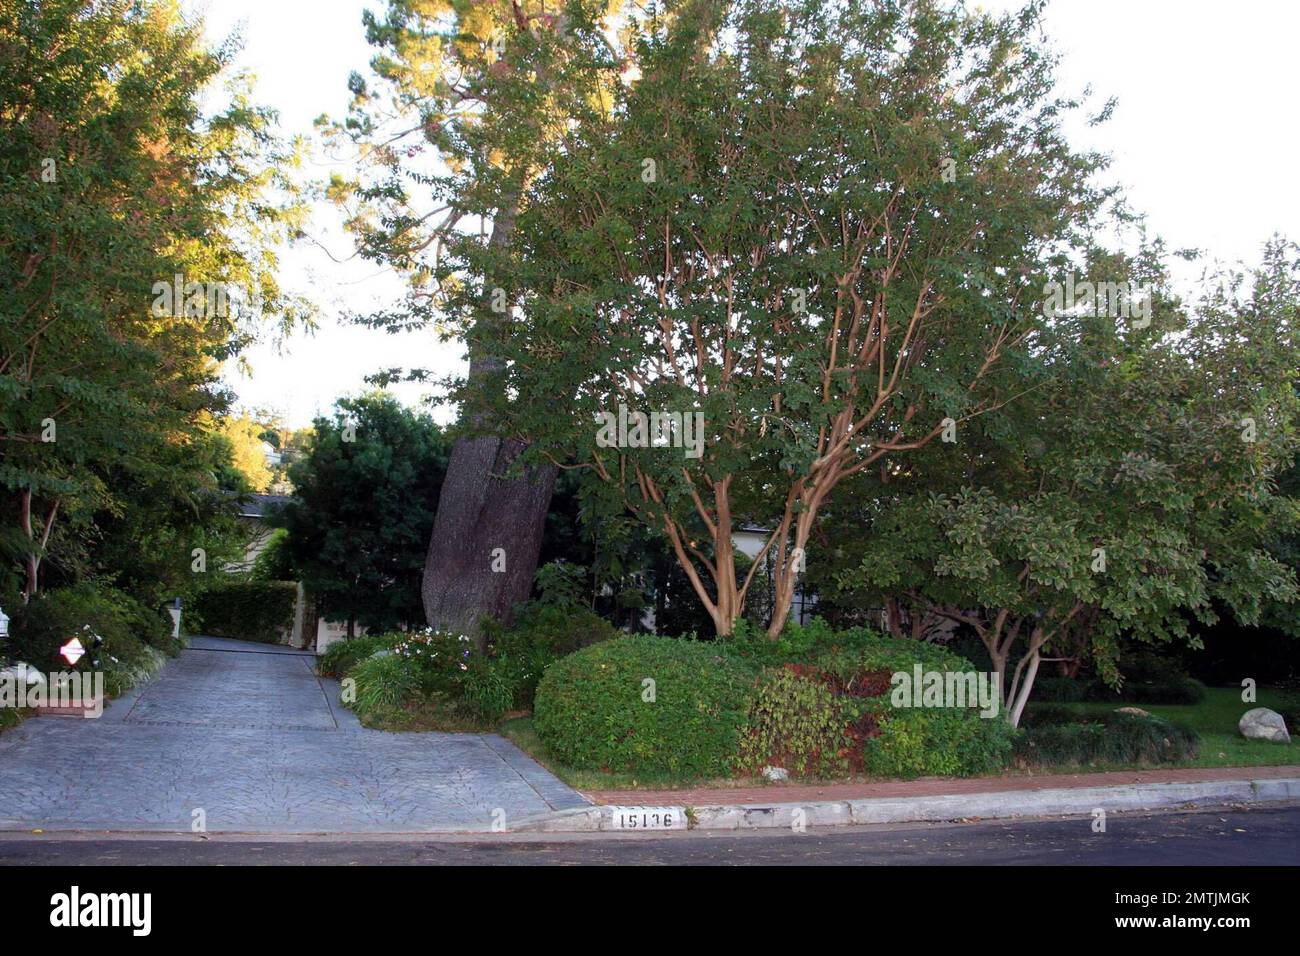 https://c8.alamy.com/comp/2MTJMGK/exclusive!!-scott-weiland-is-reportedly-selling-his-sherman-oaks-home-for-225-million-the-3-bed-3-bath-home-is-3300-squire-feet-and-sits-on-41-acres-of-lushly-landscaped-property-with-many-mature-trees-the-home-built-in-1926-features-hardwood-floors-a-swimming-pool-fireplaces-among-other-luxurious-features-los-angeles-ca-10308-2MTJMGK.jpg